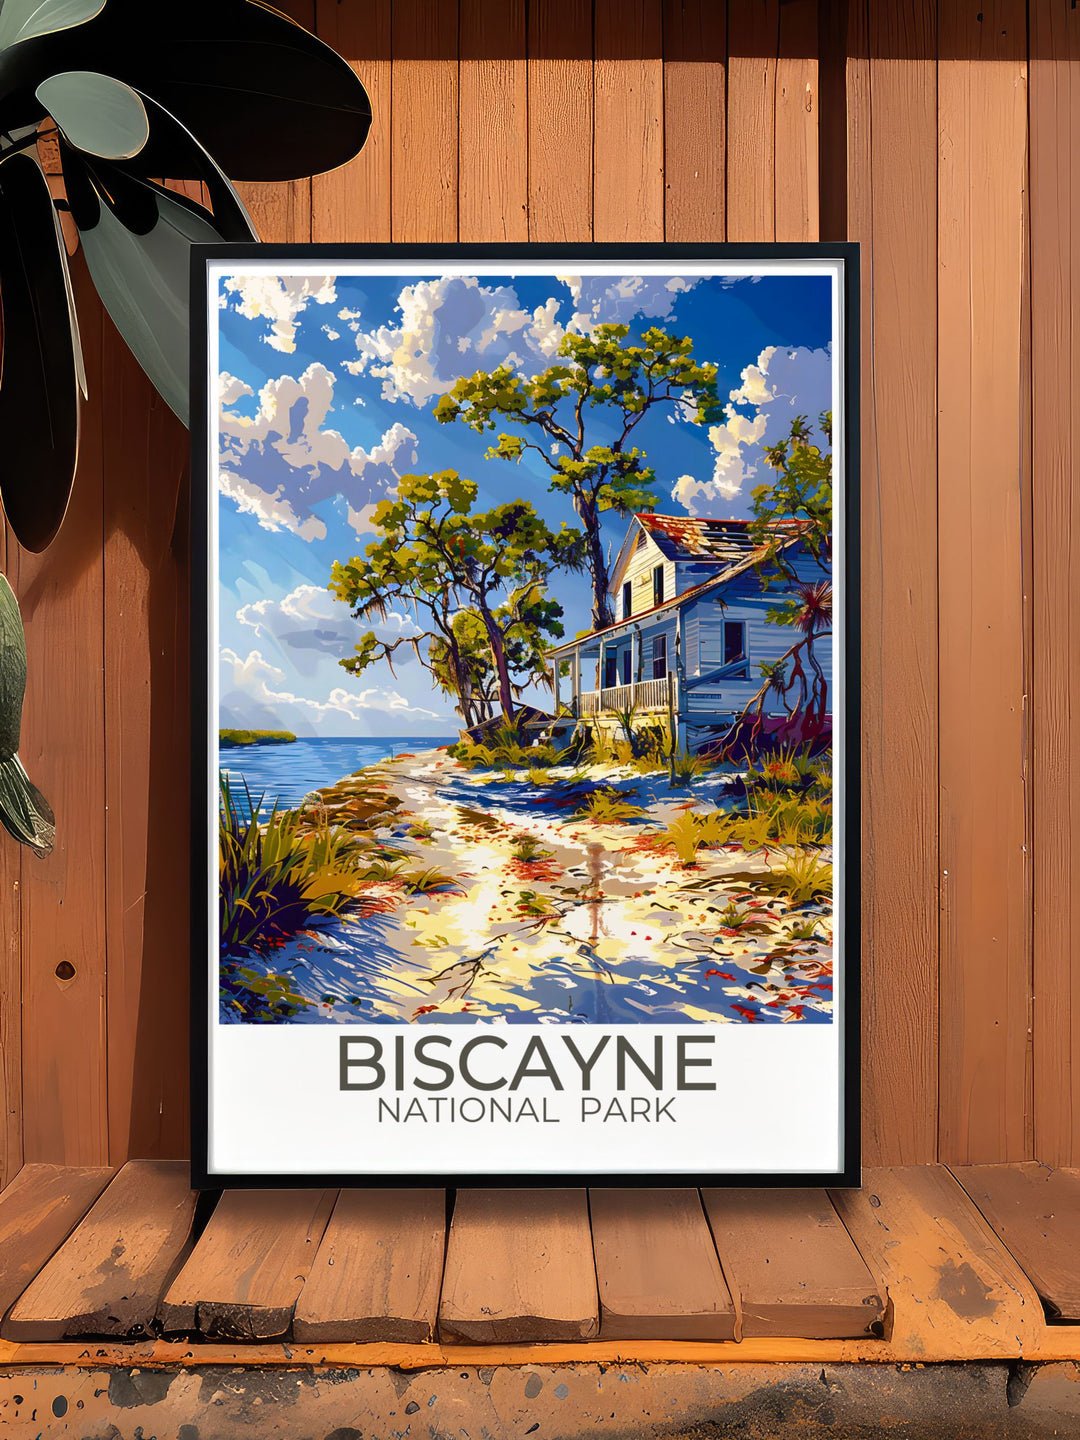 Unique artwork of Biscayne National Park featuring The Maritime Heritage Trail and coral reefs, perfect for personalized gifts or home decor. This print captures the essence of Floridas most scenic national park.